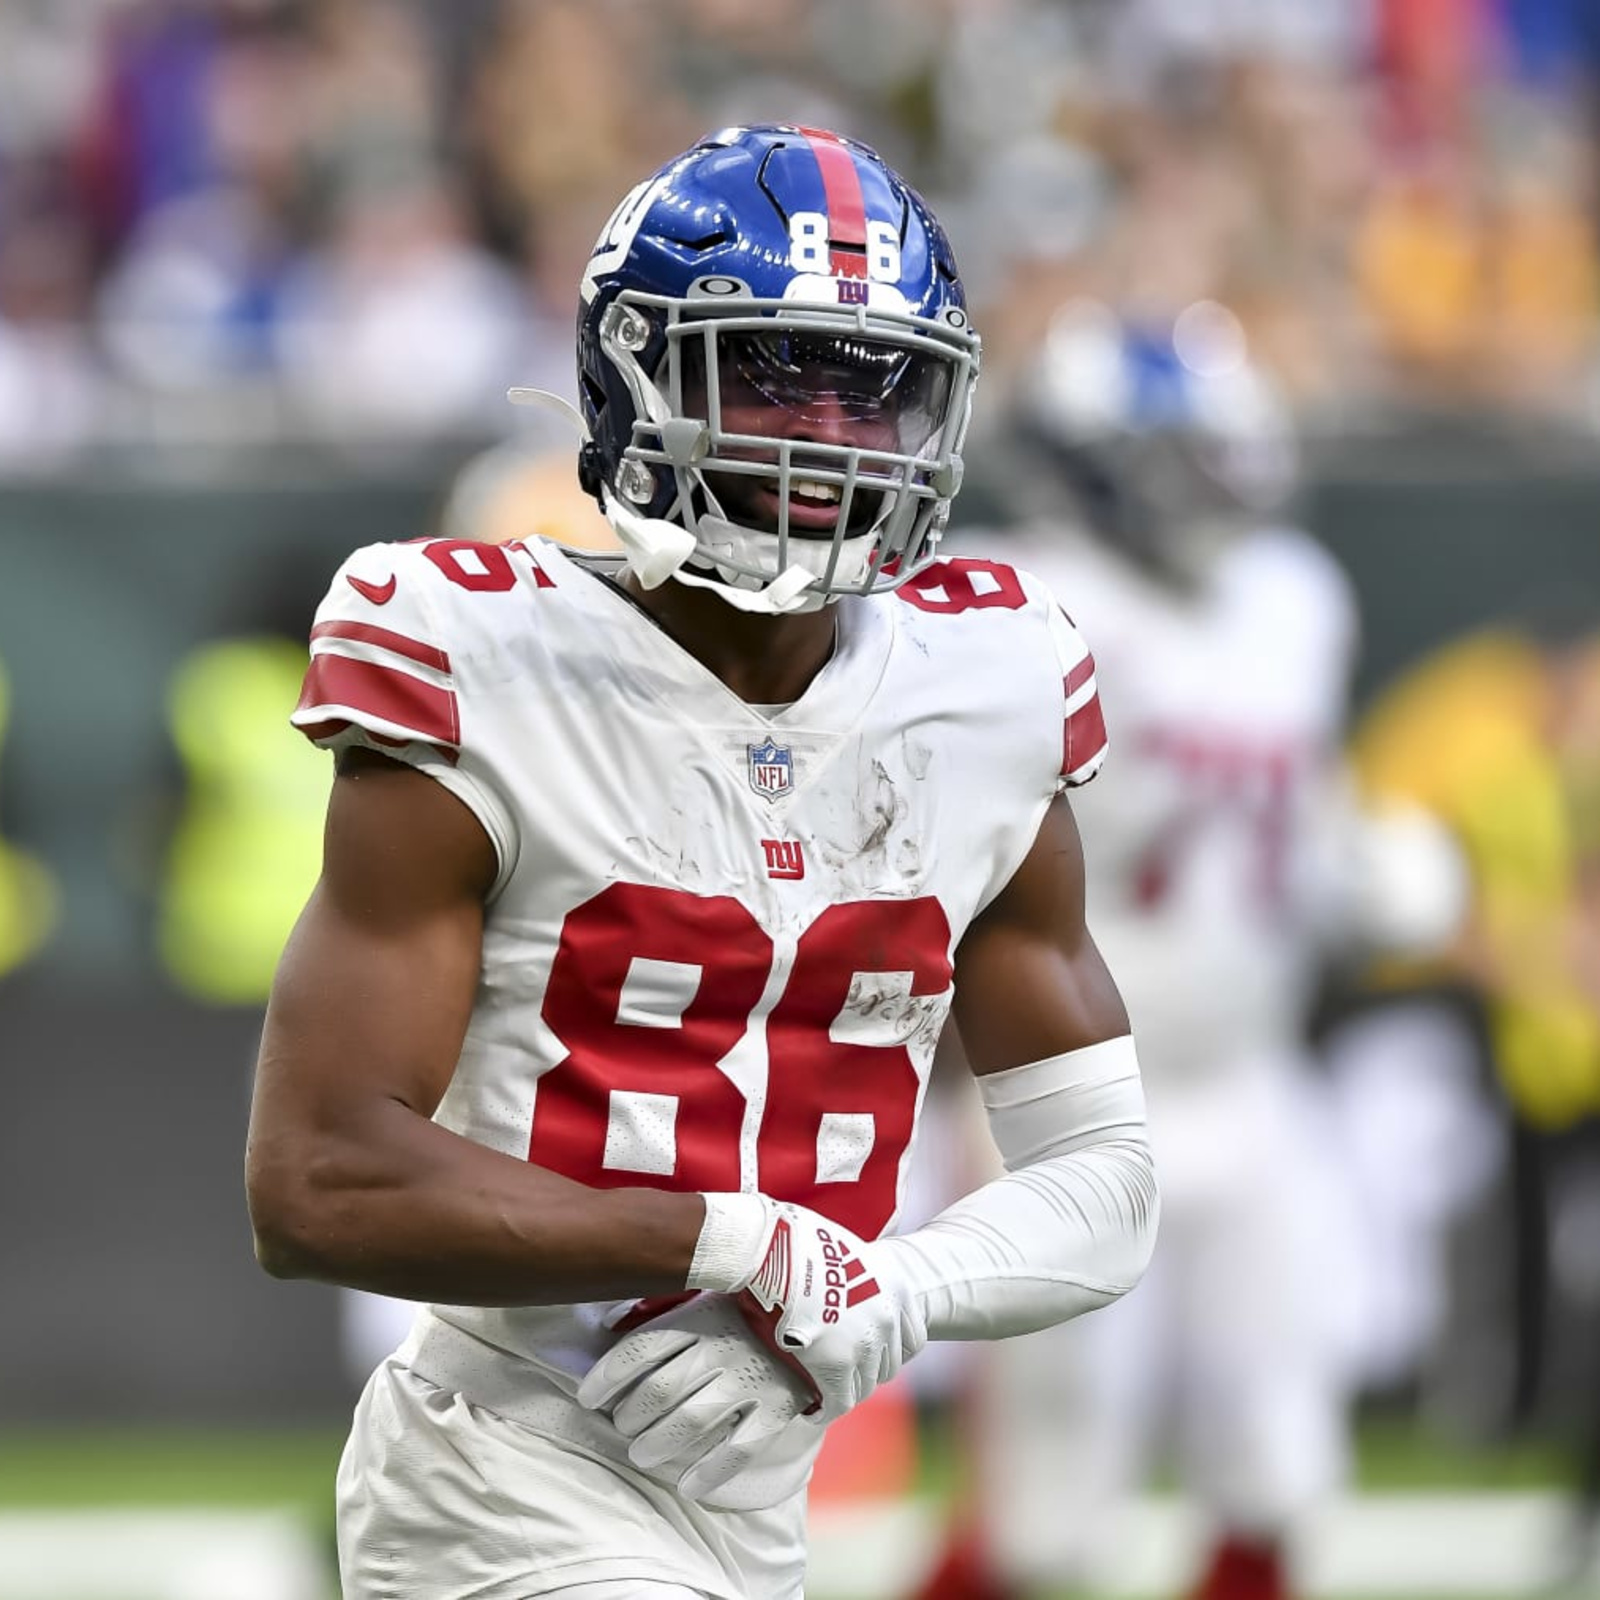 New York Giants - Reports: We have agreed to terms with WR Darius Slayton  Details: nygnt.co/rm315ds